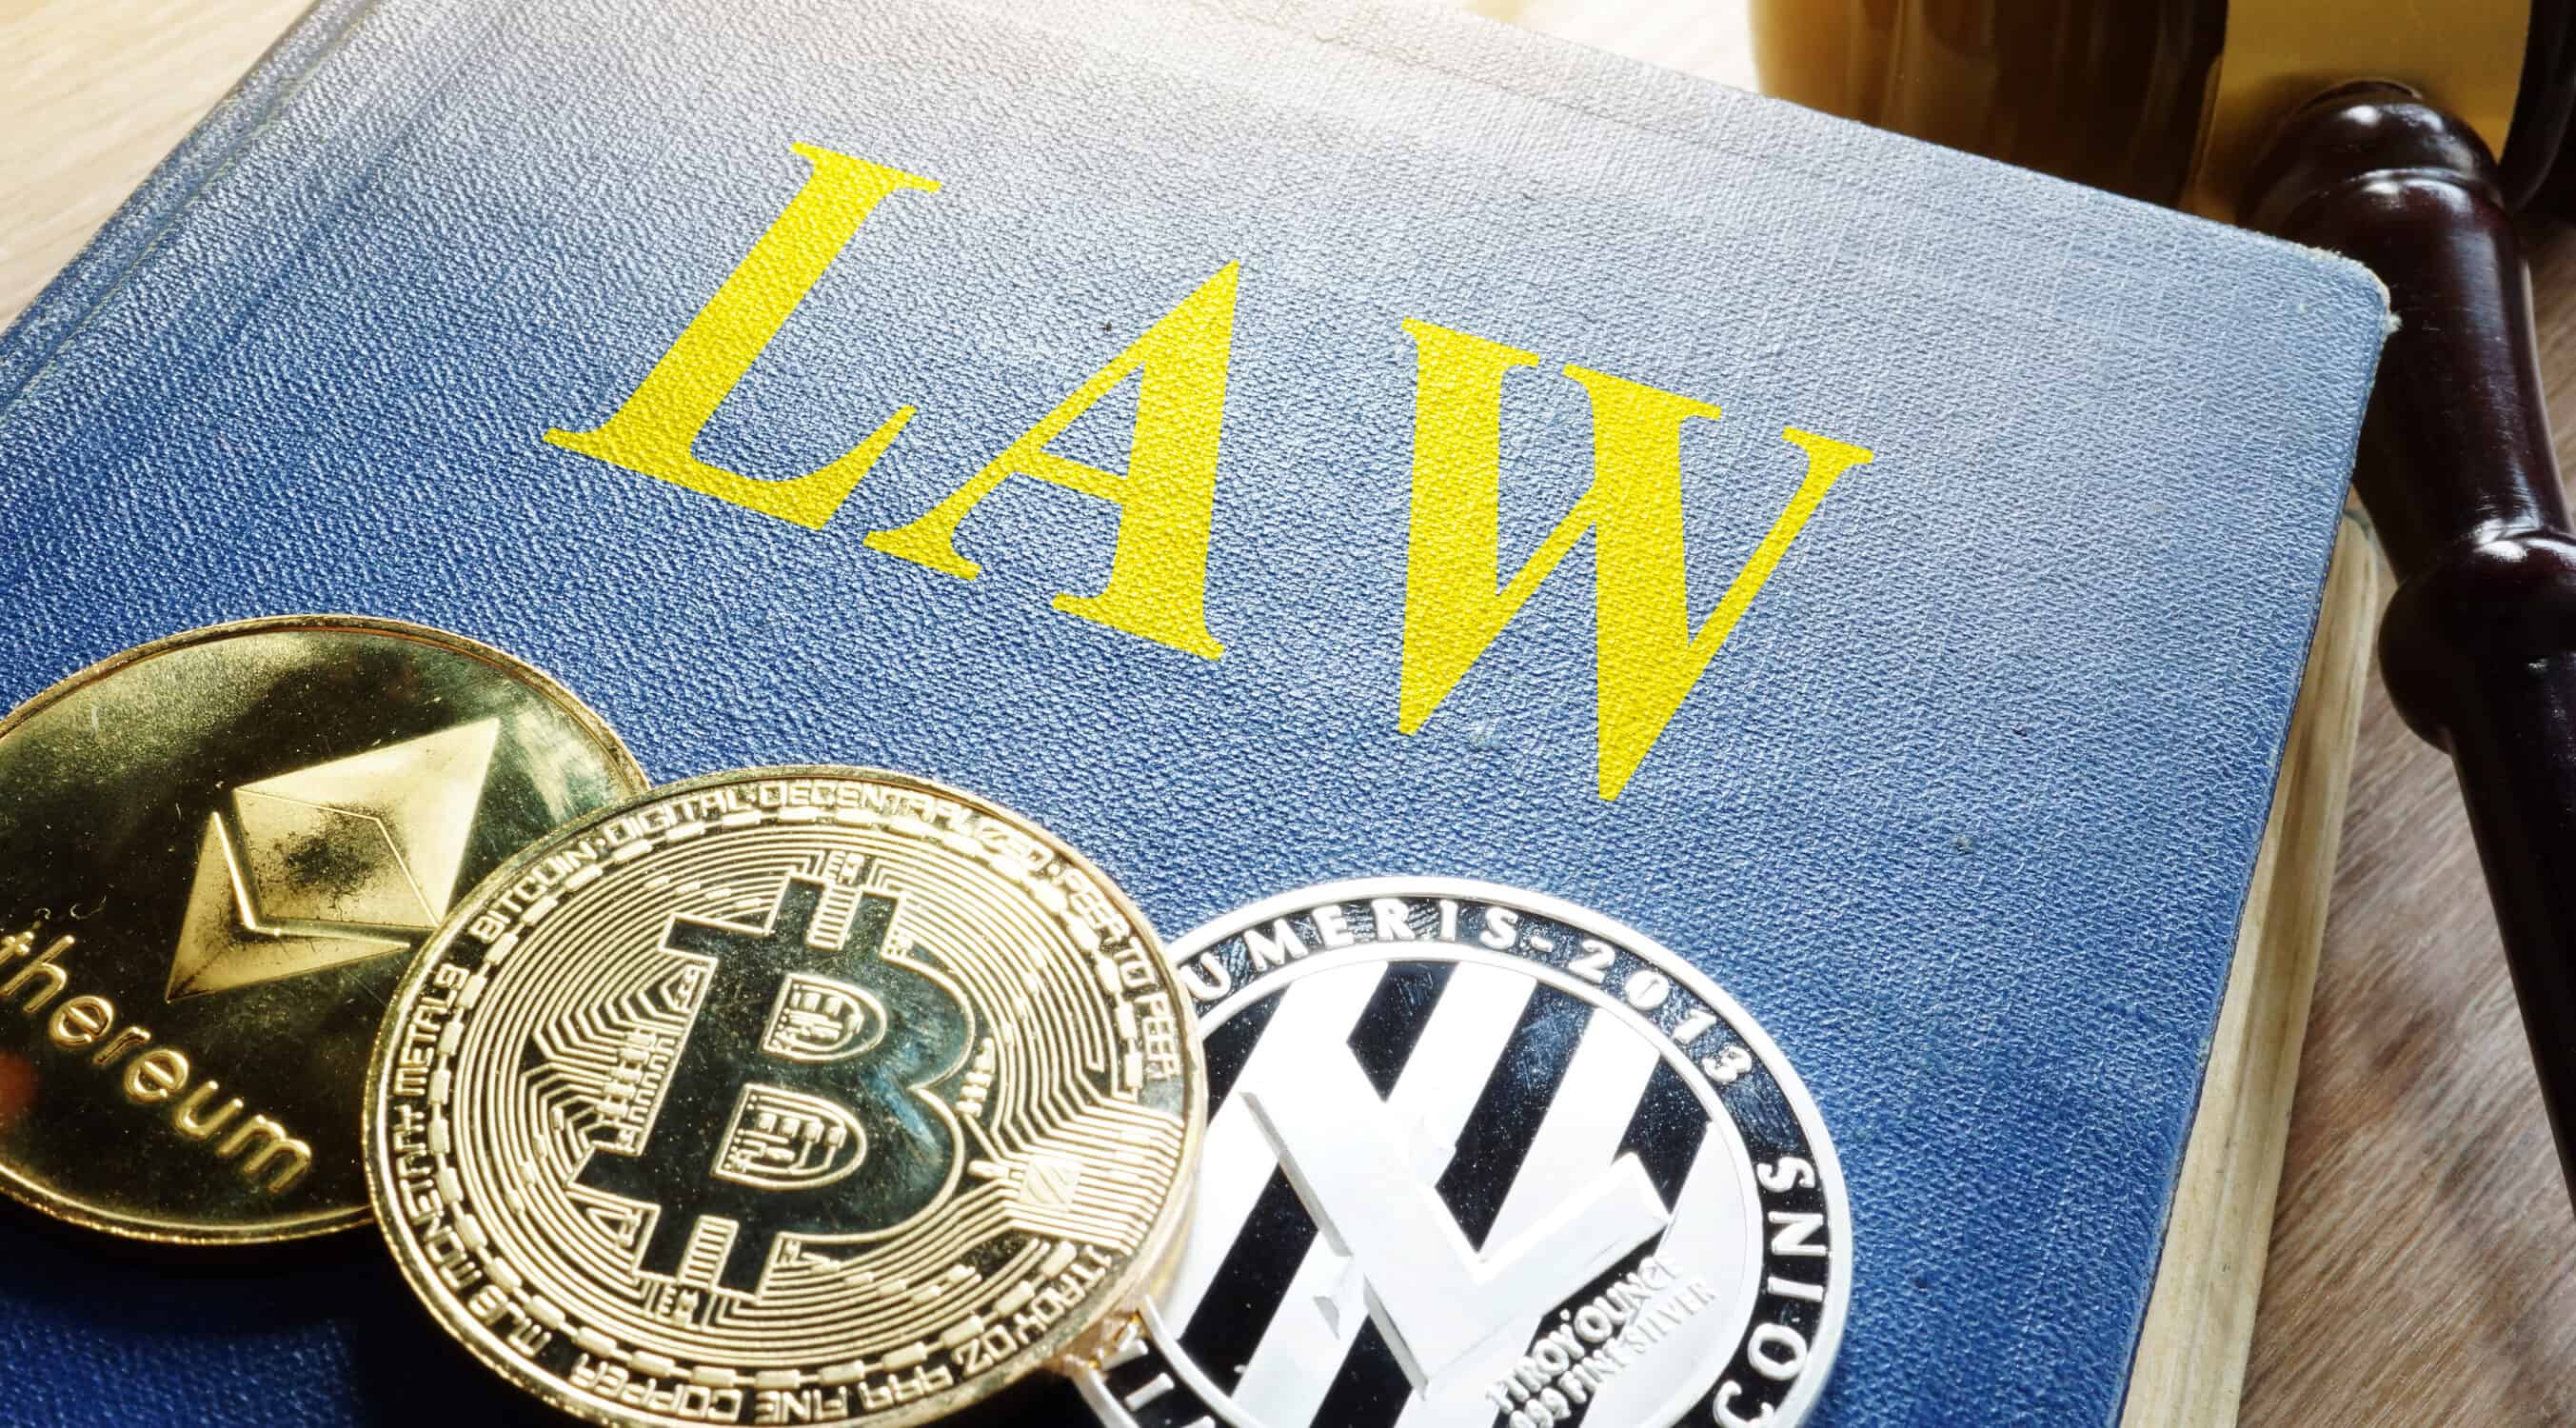 Bitcoin - Countries Where It's Illegal or Legal